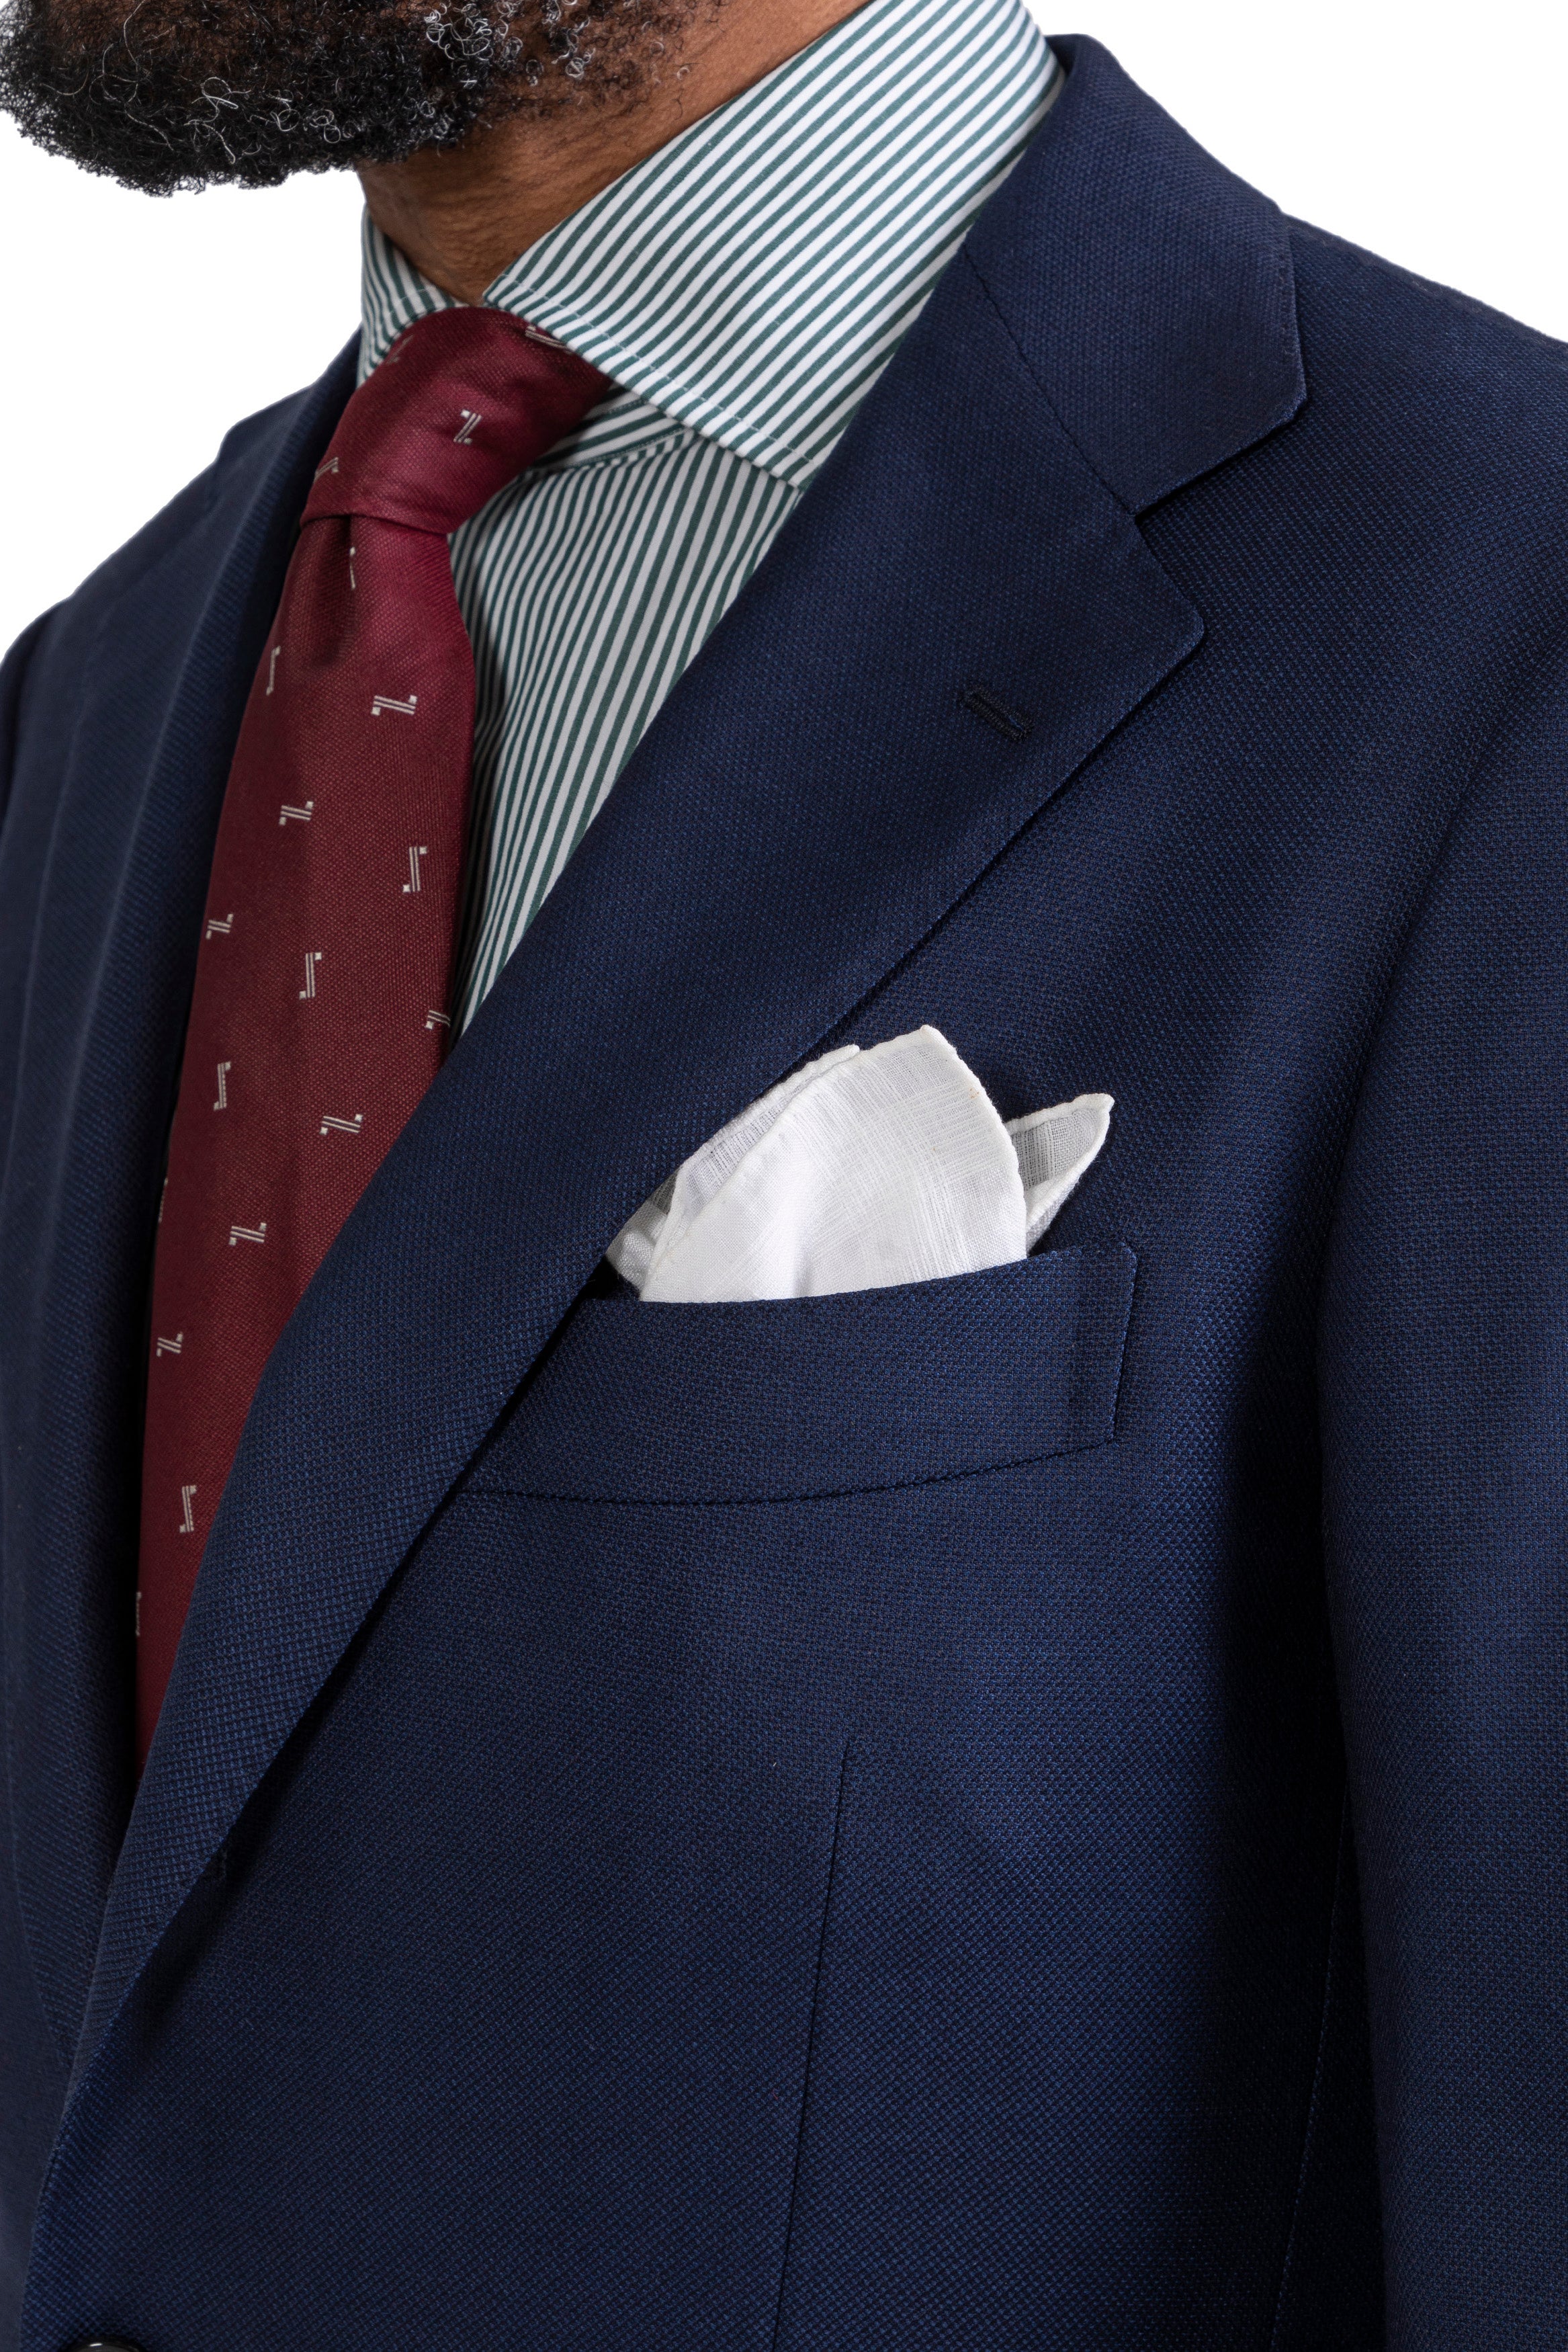 The Armoury Model 3 Blue Dormeuil Wool Sport Coat